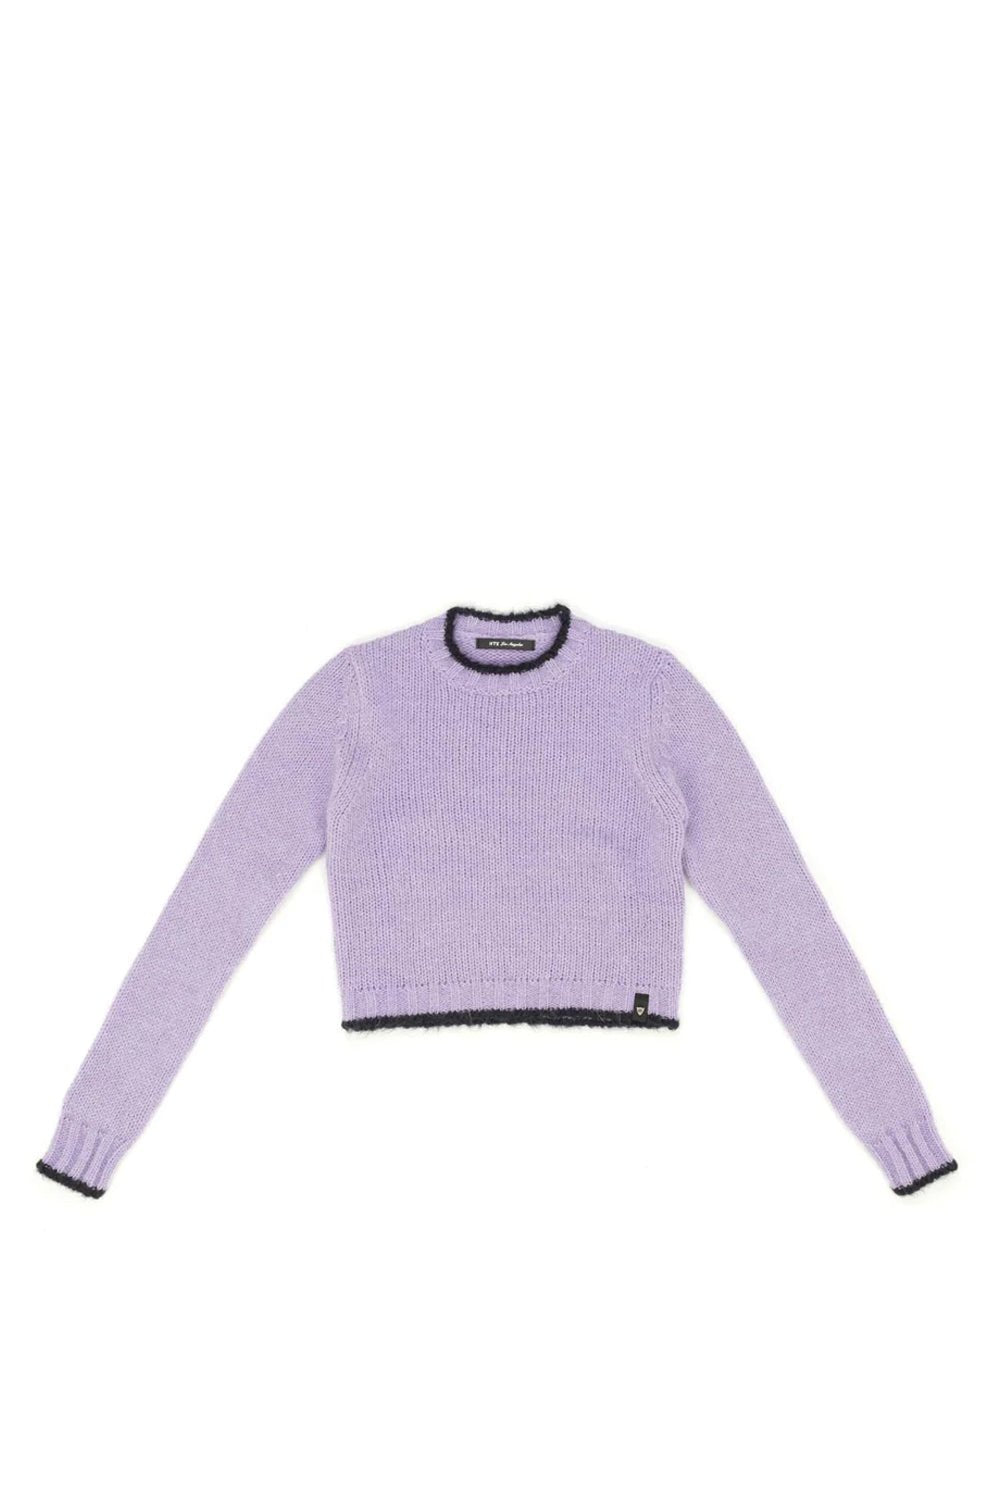 MOCK KNIT SWEATER Lilac knit mock neck jumper. 42% Acrylic 30% Polyamide 14% Mohair 14% Wool HTC LOS ANGELES